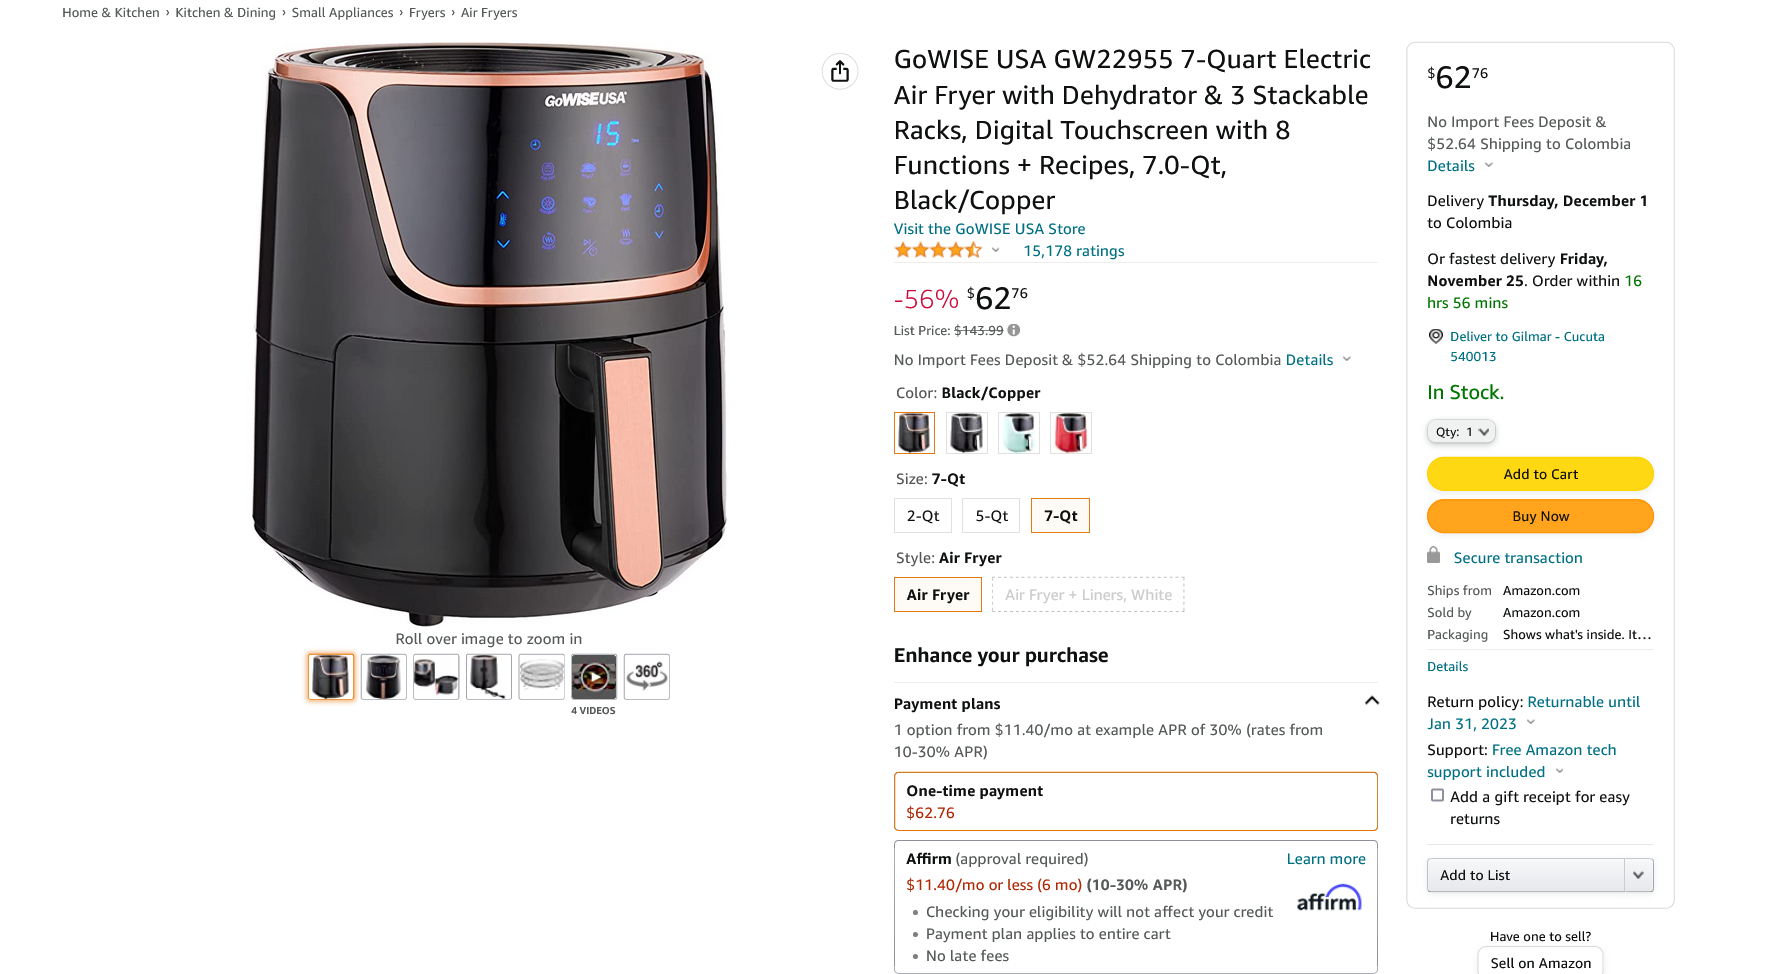 Screenshot 2022-11-16 at 20-19-18 Amazon.com GoWISE USA GW22955 7-Quart Electric Air Fryer wit...png